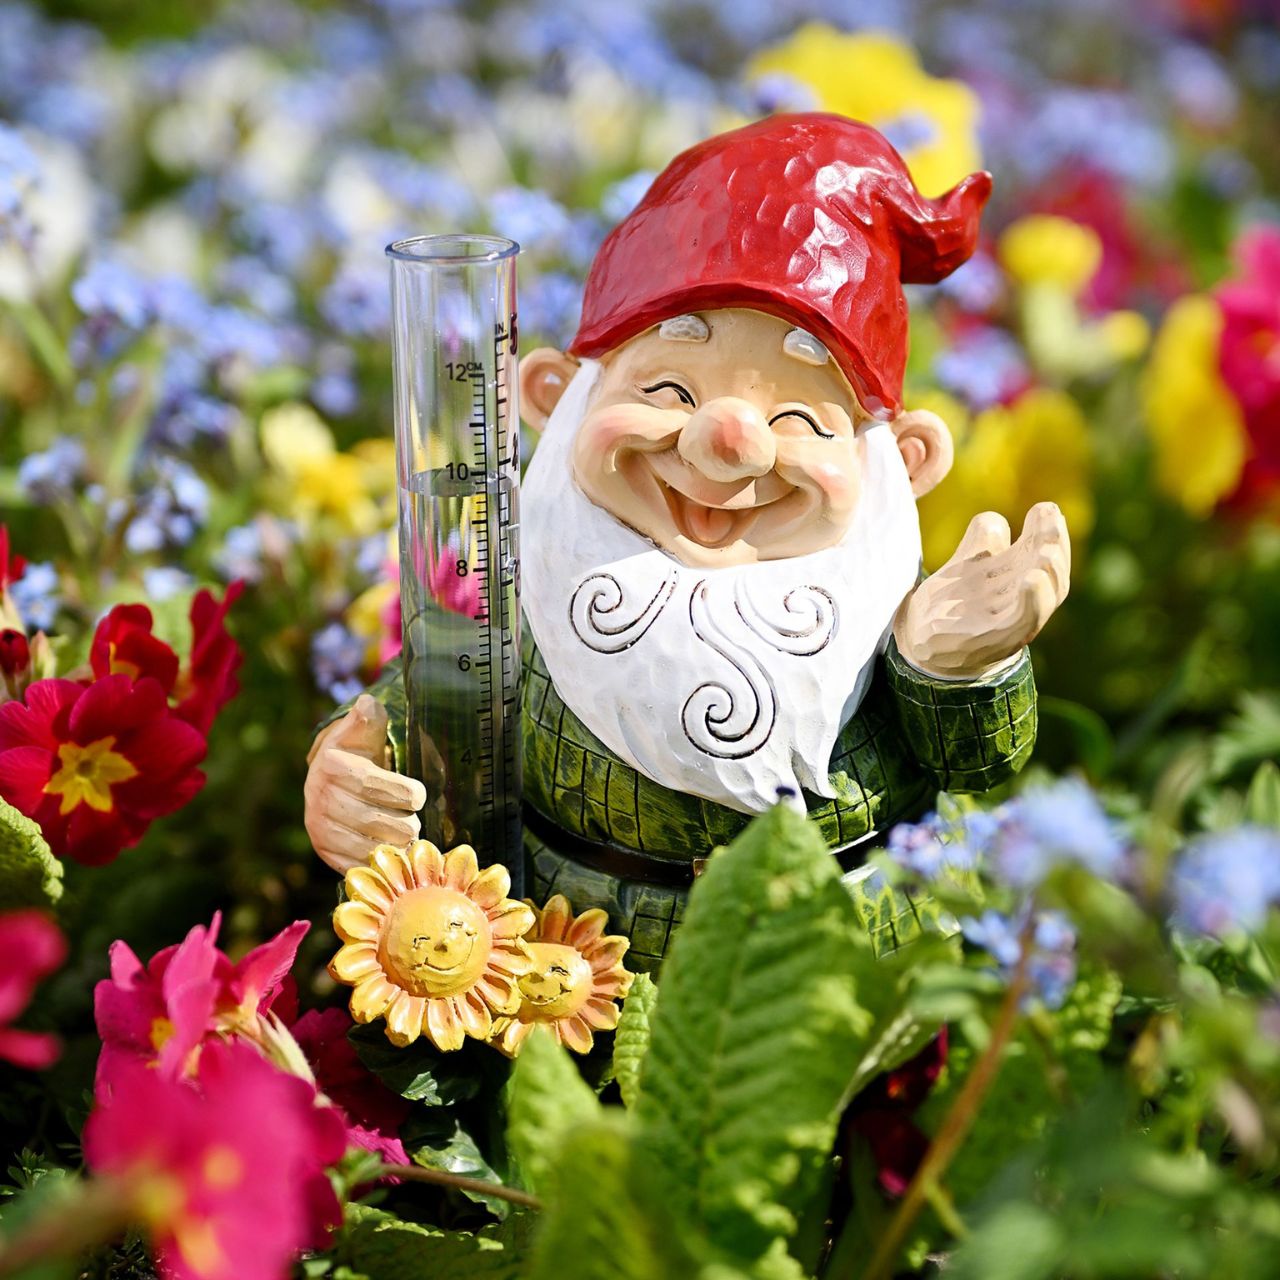 Country Living Garden Gnome With Sunflowers  Bring some rustic cheer to your outdoor living space with this charming hand painted gnome. From Country Living - bringing you closer to nature.